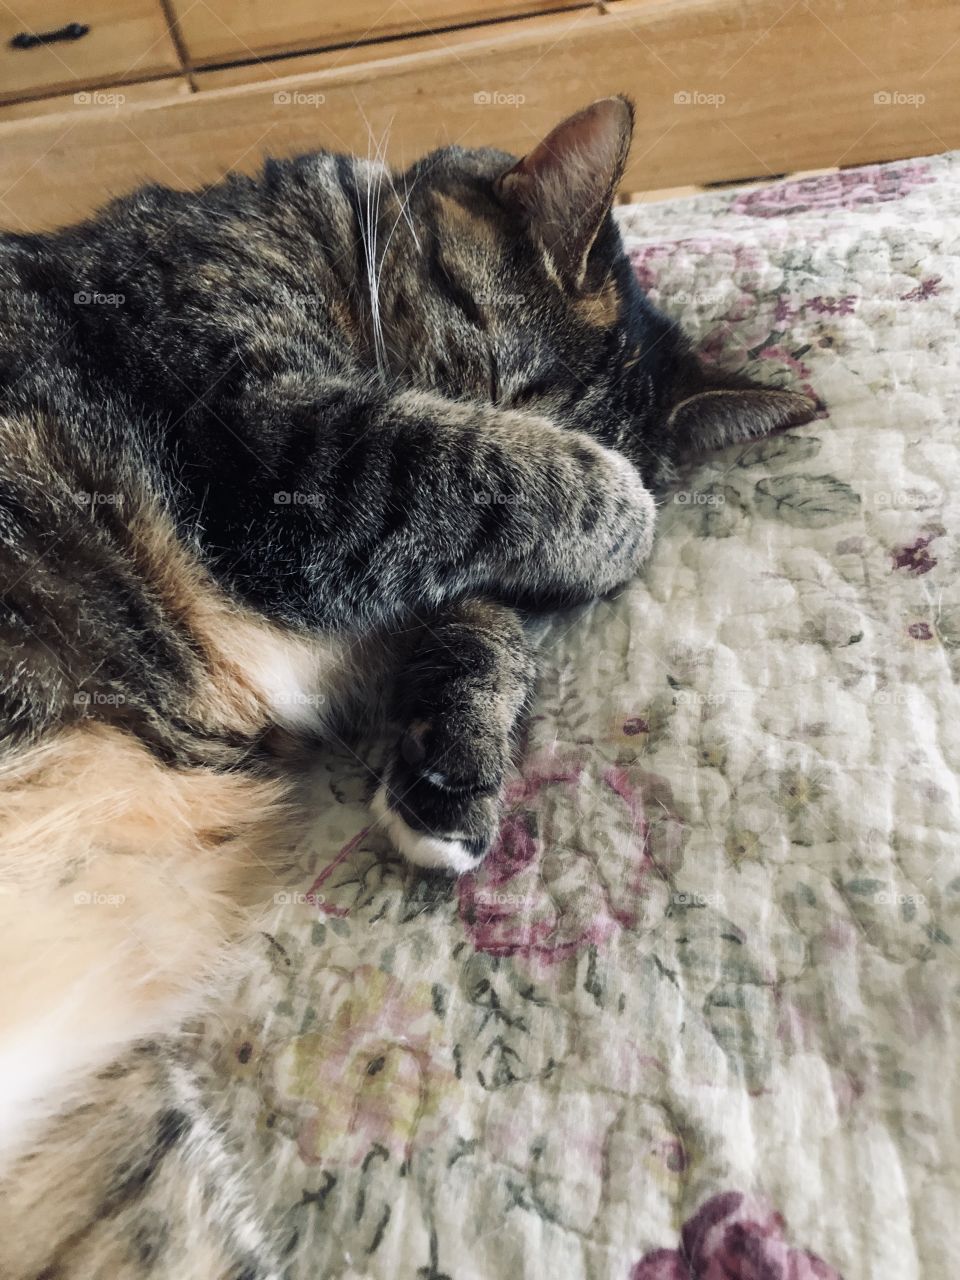 Sleeping cat paws covering her eyes and face cuteness overload tabby cat comfy cat 